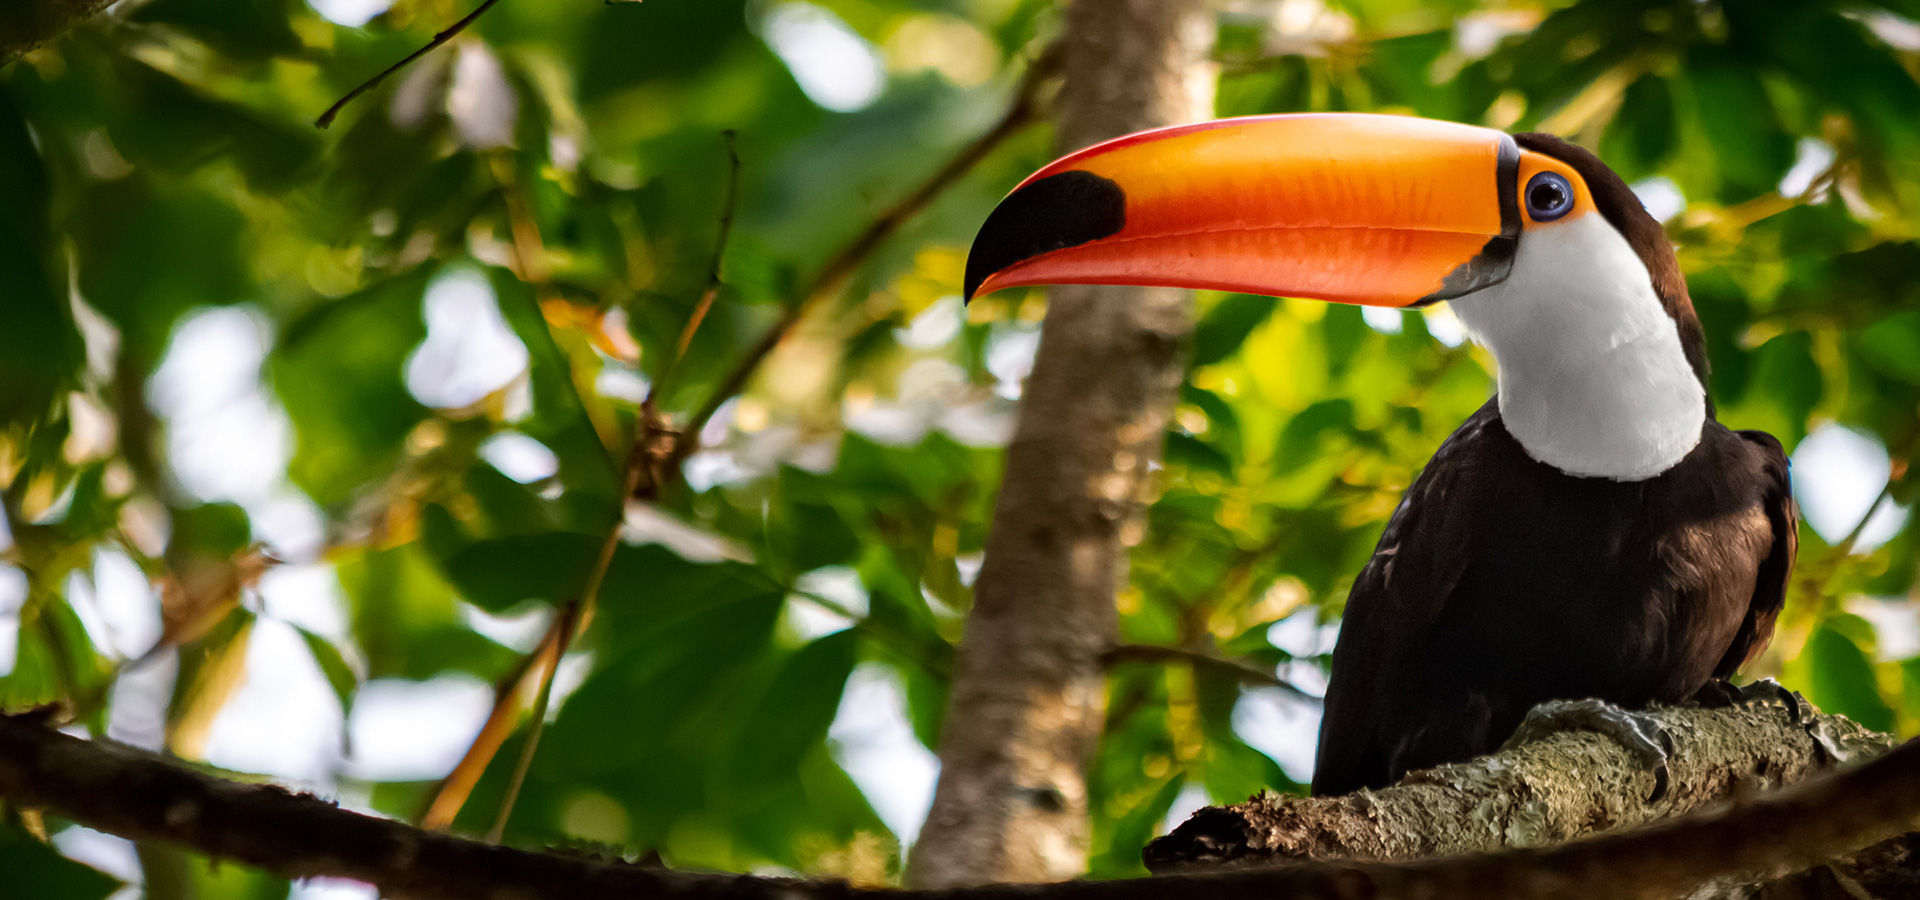 “Thanks to the Hitachi Vantara partnership, we now have a secure, agile and scalable cloud solution that will help us protect more rainforests around the world.”